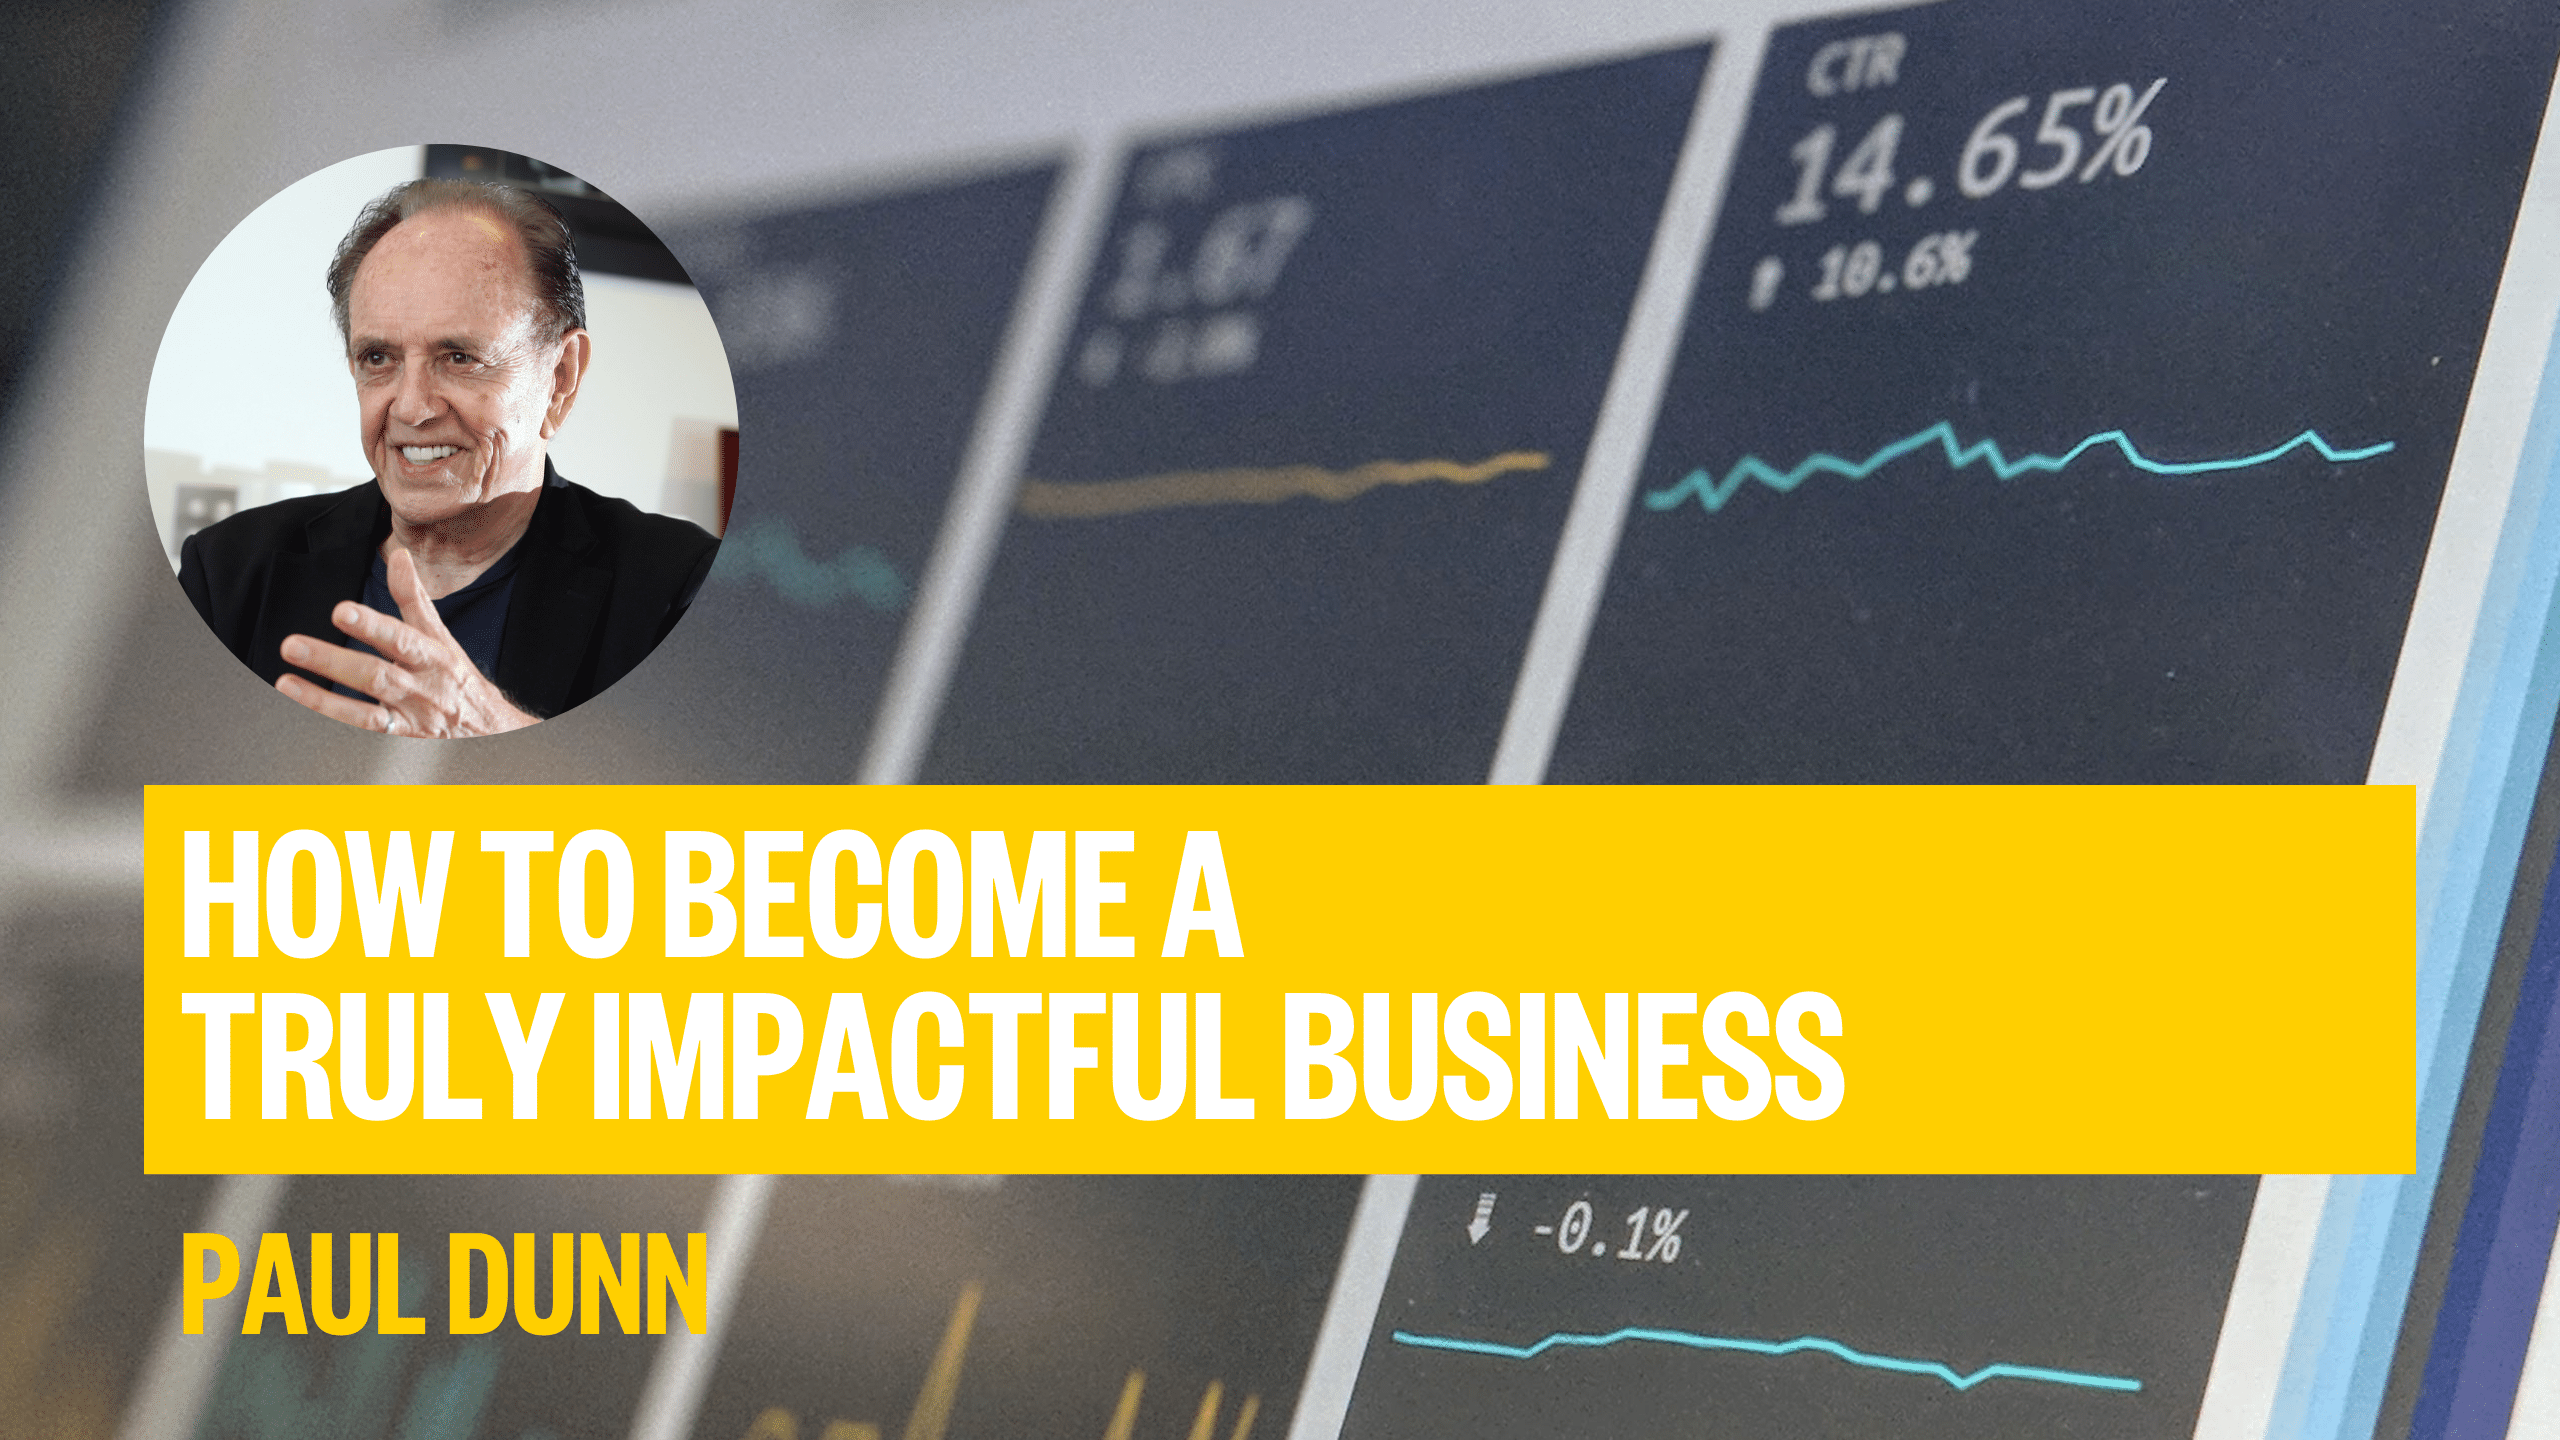 How to come a truly impactful business. Link to video workshop